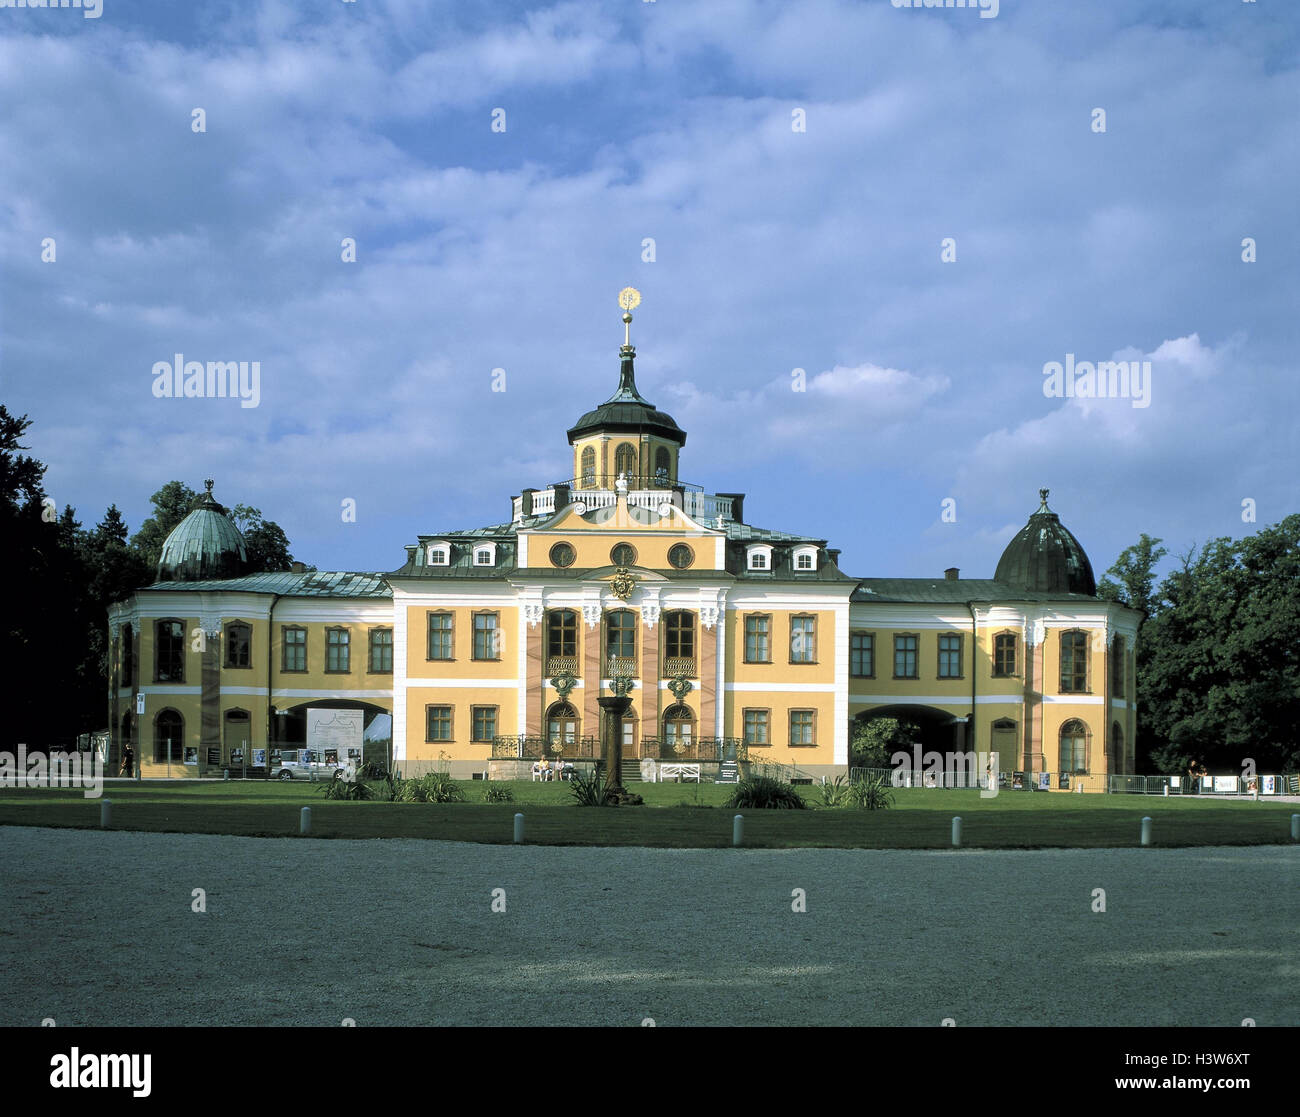 Germany, Thuringia, Weimar, castle Belvedere, in 1724 - 32, Europe, town, building, castle building, architectural style, rococo, rococo lock, structure, architecture, place of interest, park, park, culture, summer Stock Photo